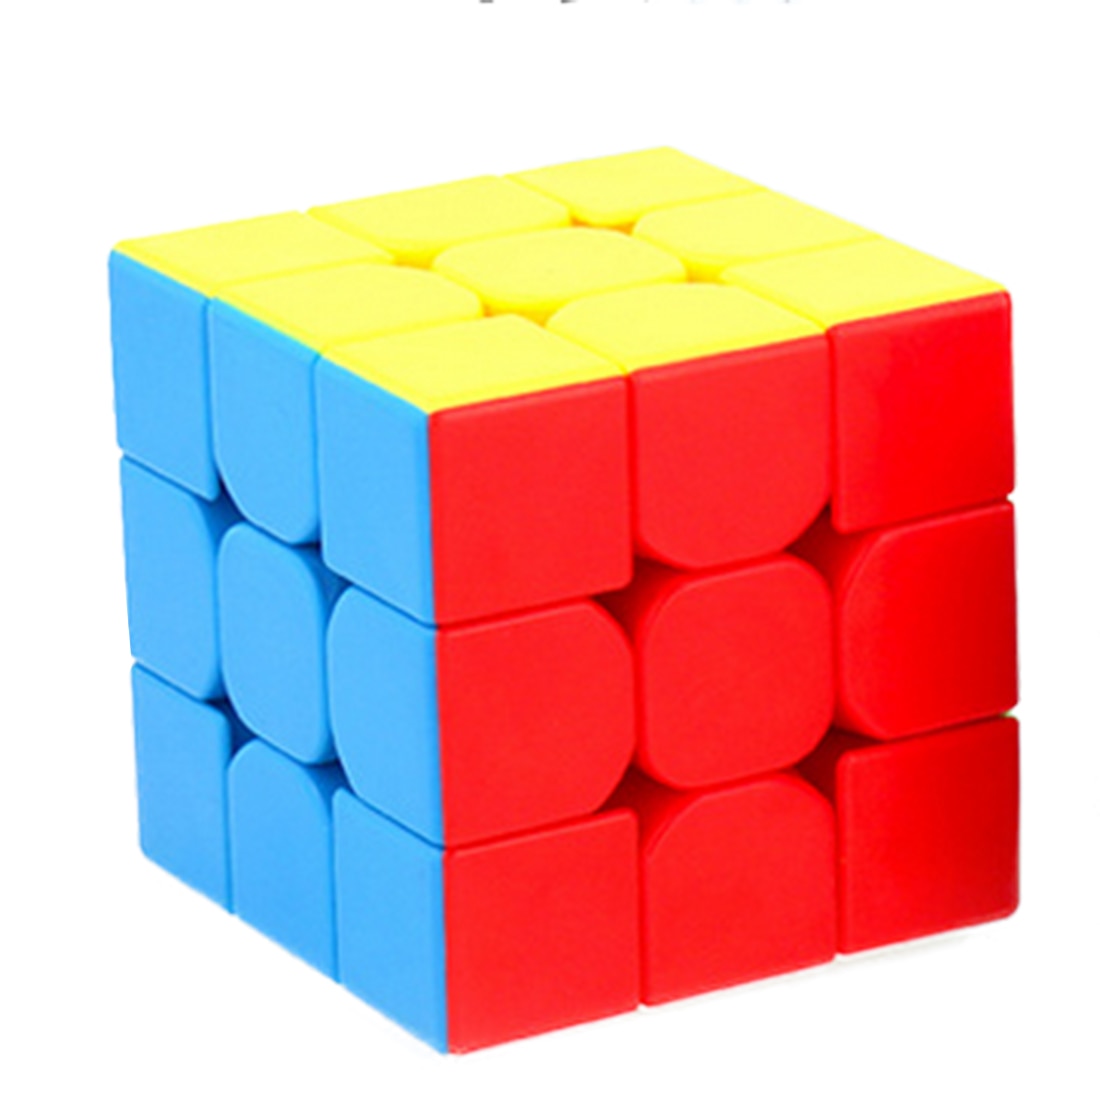 Cubing Classroom Mini 3x3x3 Magic Cube Puzzle Toys for Competition Challenge - Colorful